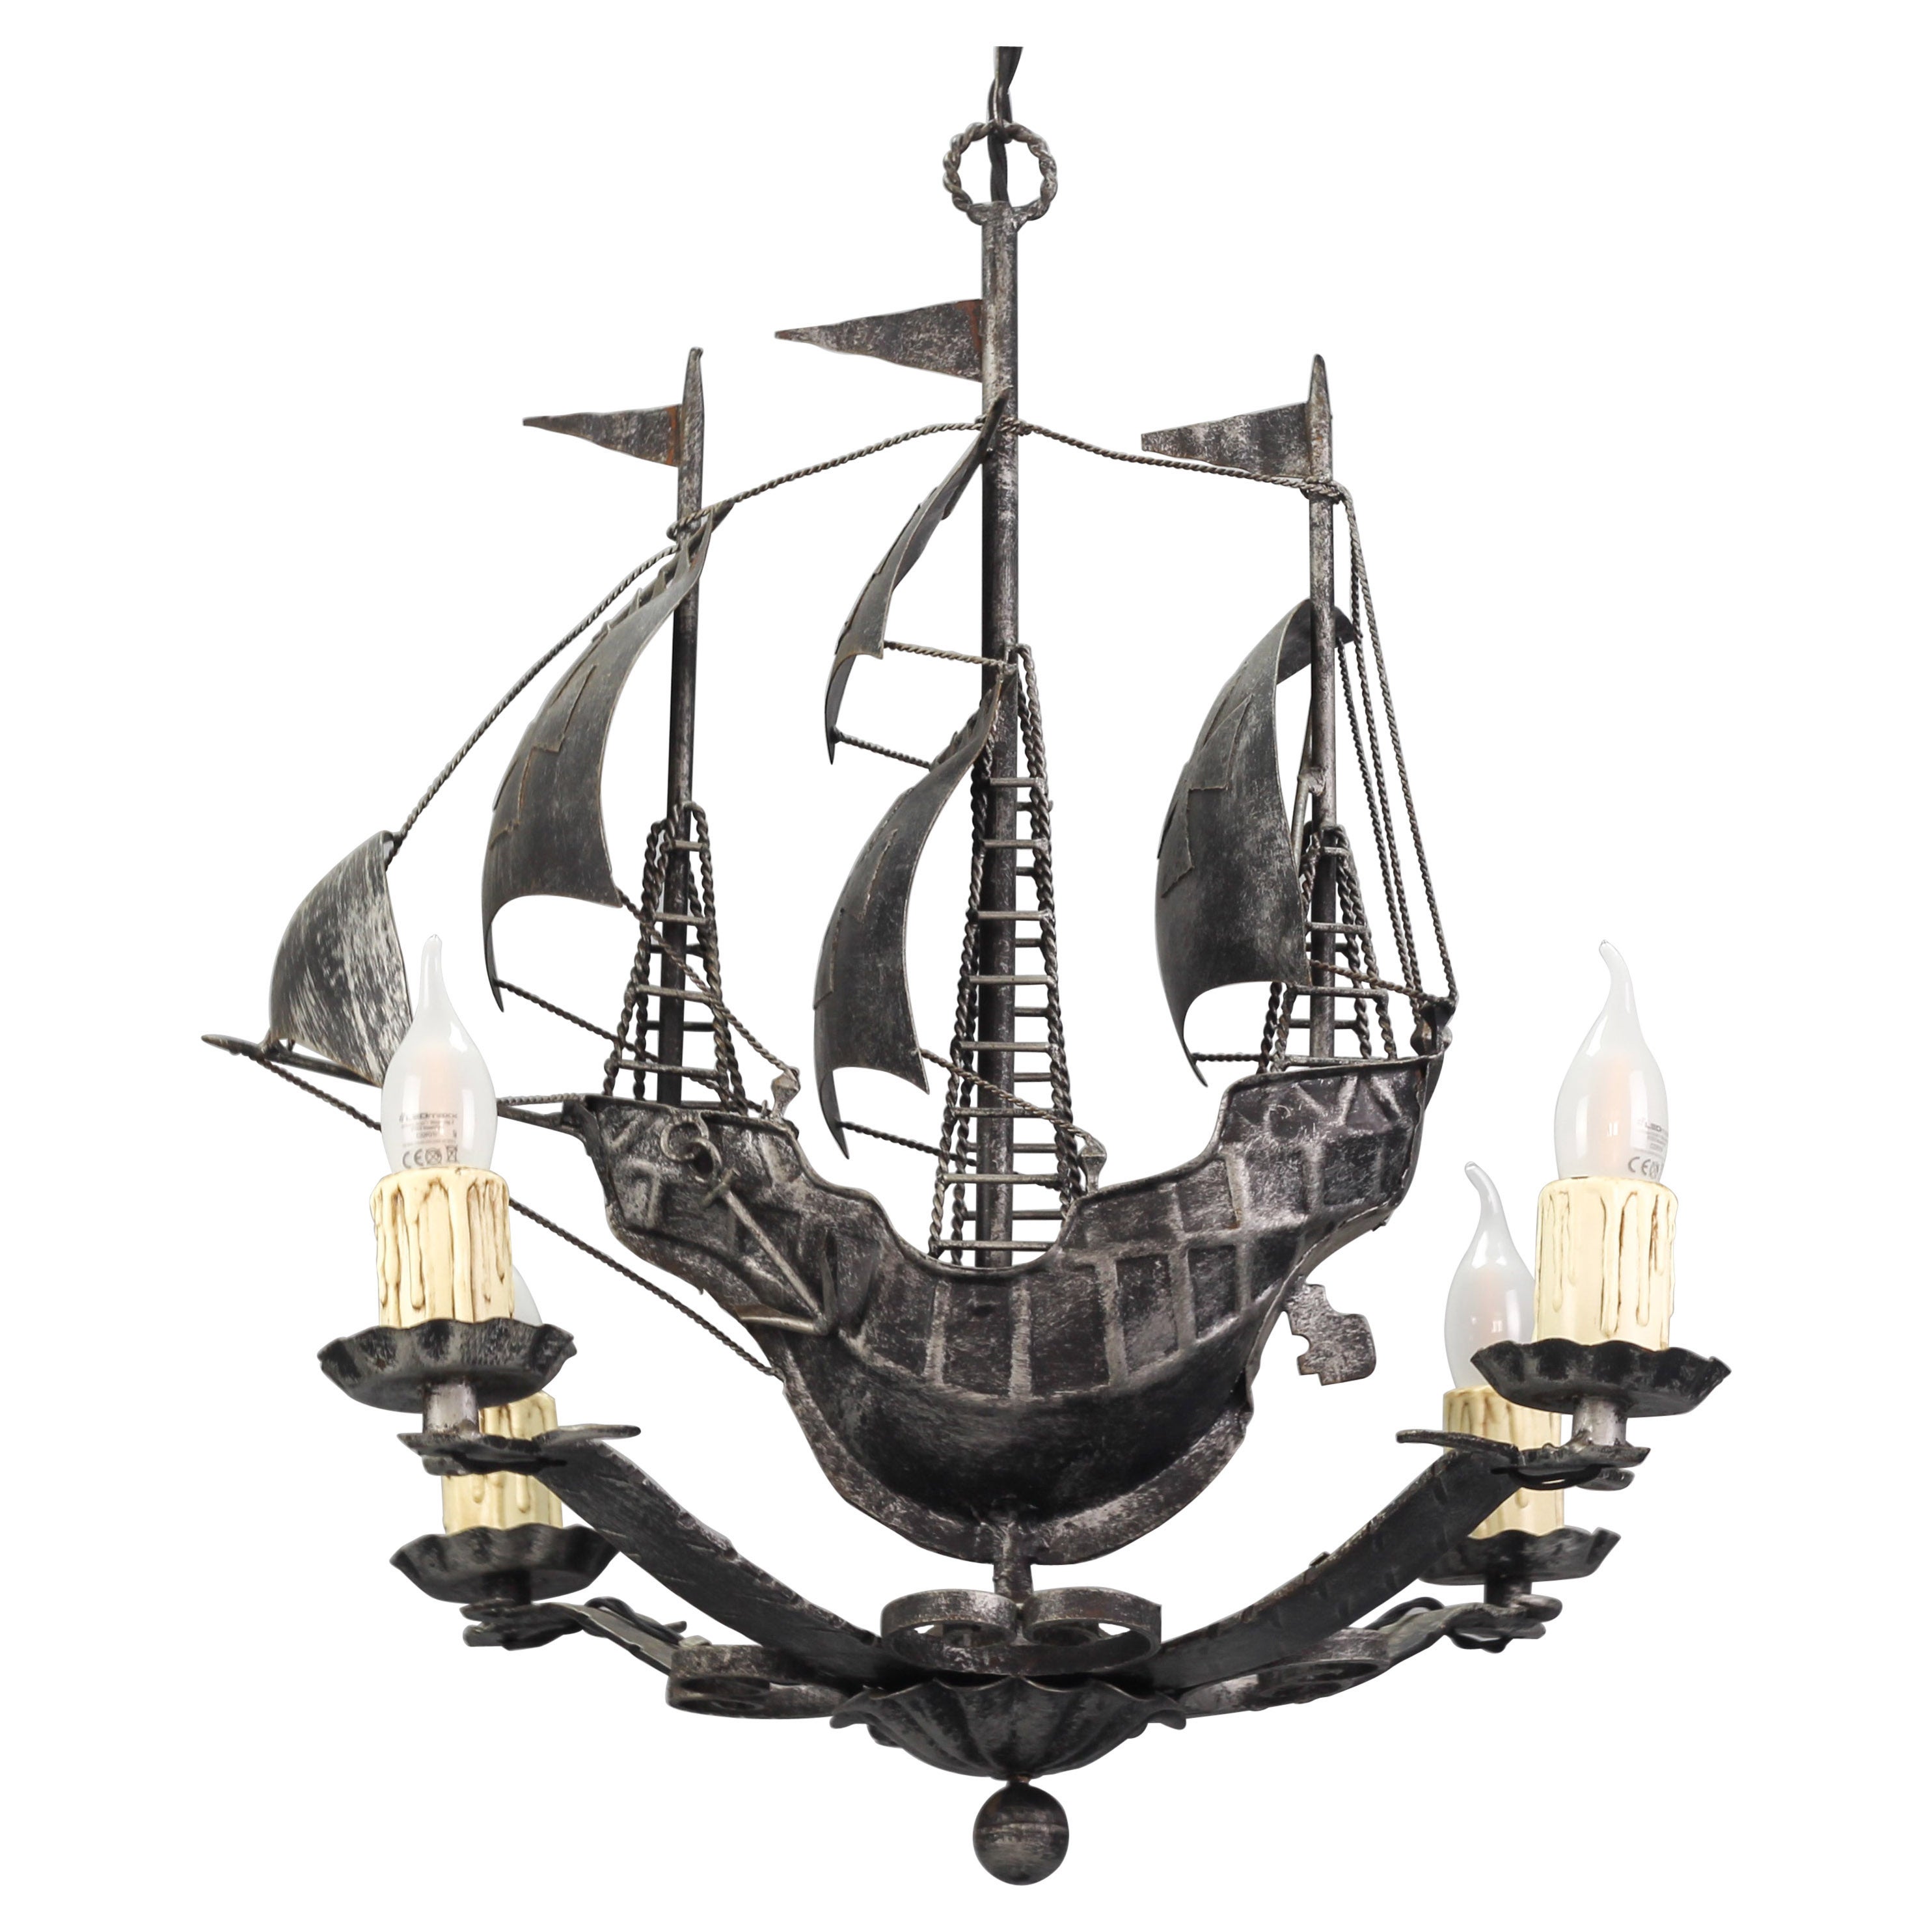 Wrought Iron Spanish Galleon Sailing Ship Shaped Four-Light Chandelier, 1950s